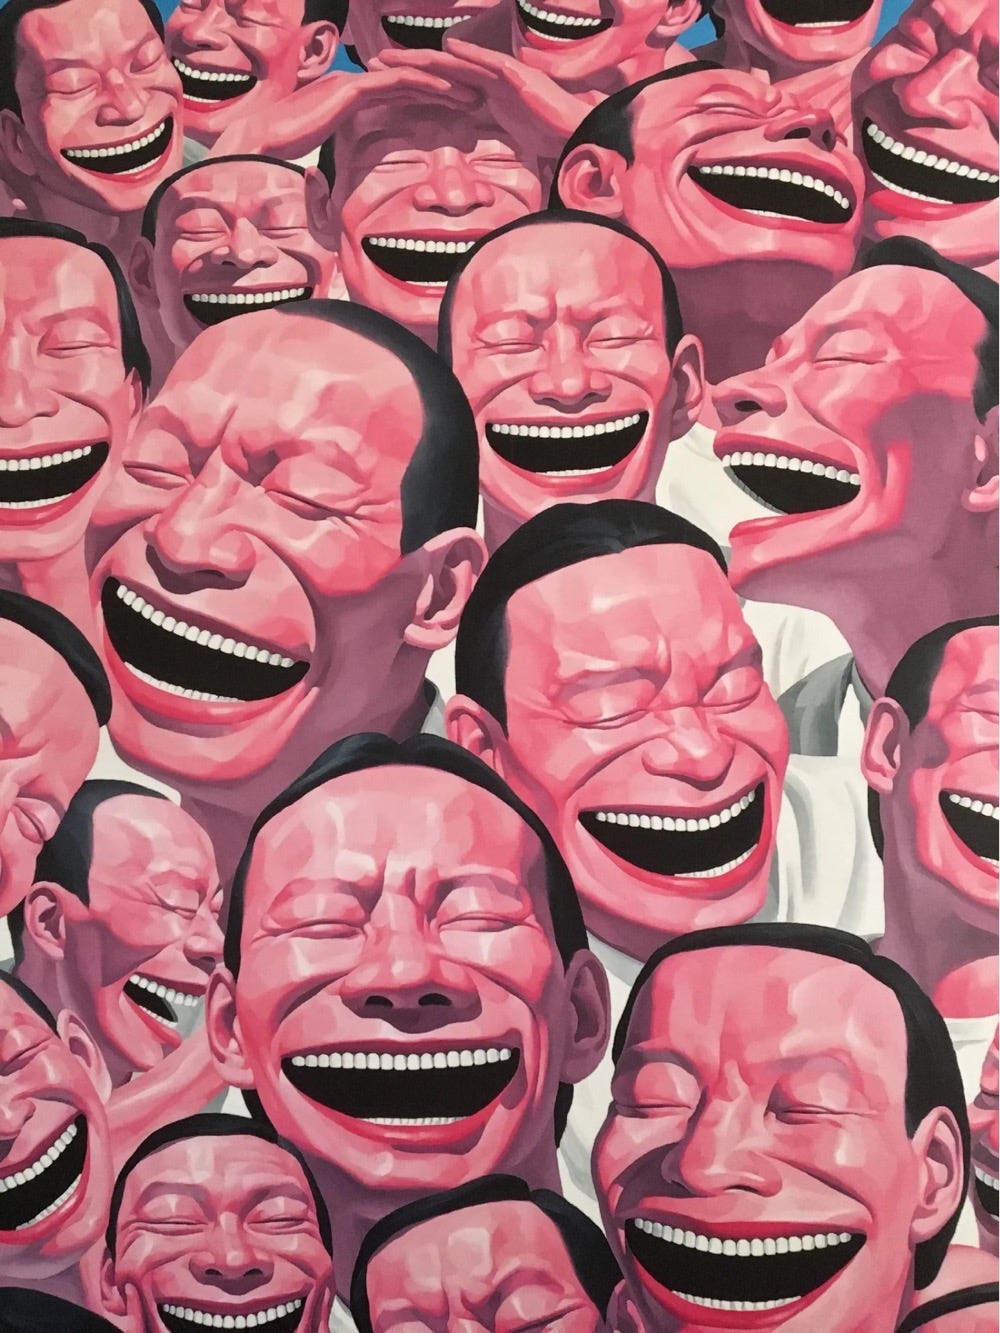 What's so funny, Yue Minjun? – The China Project